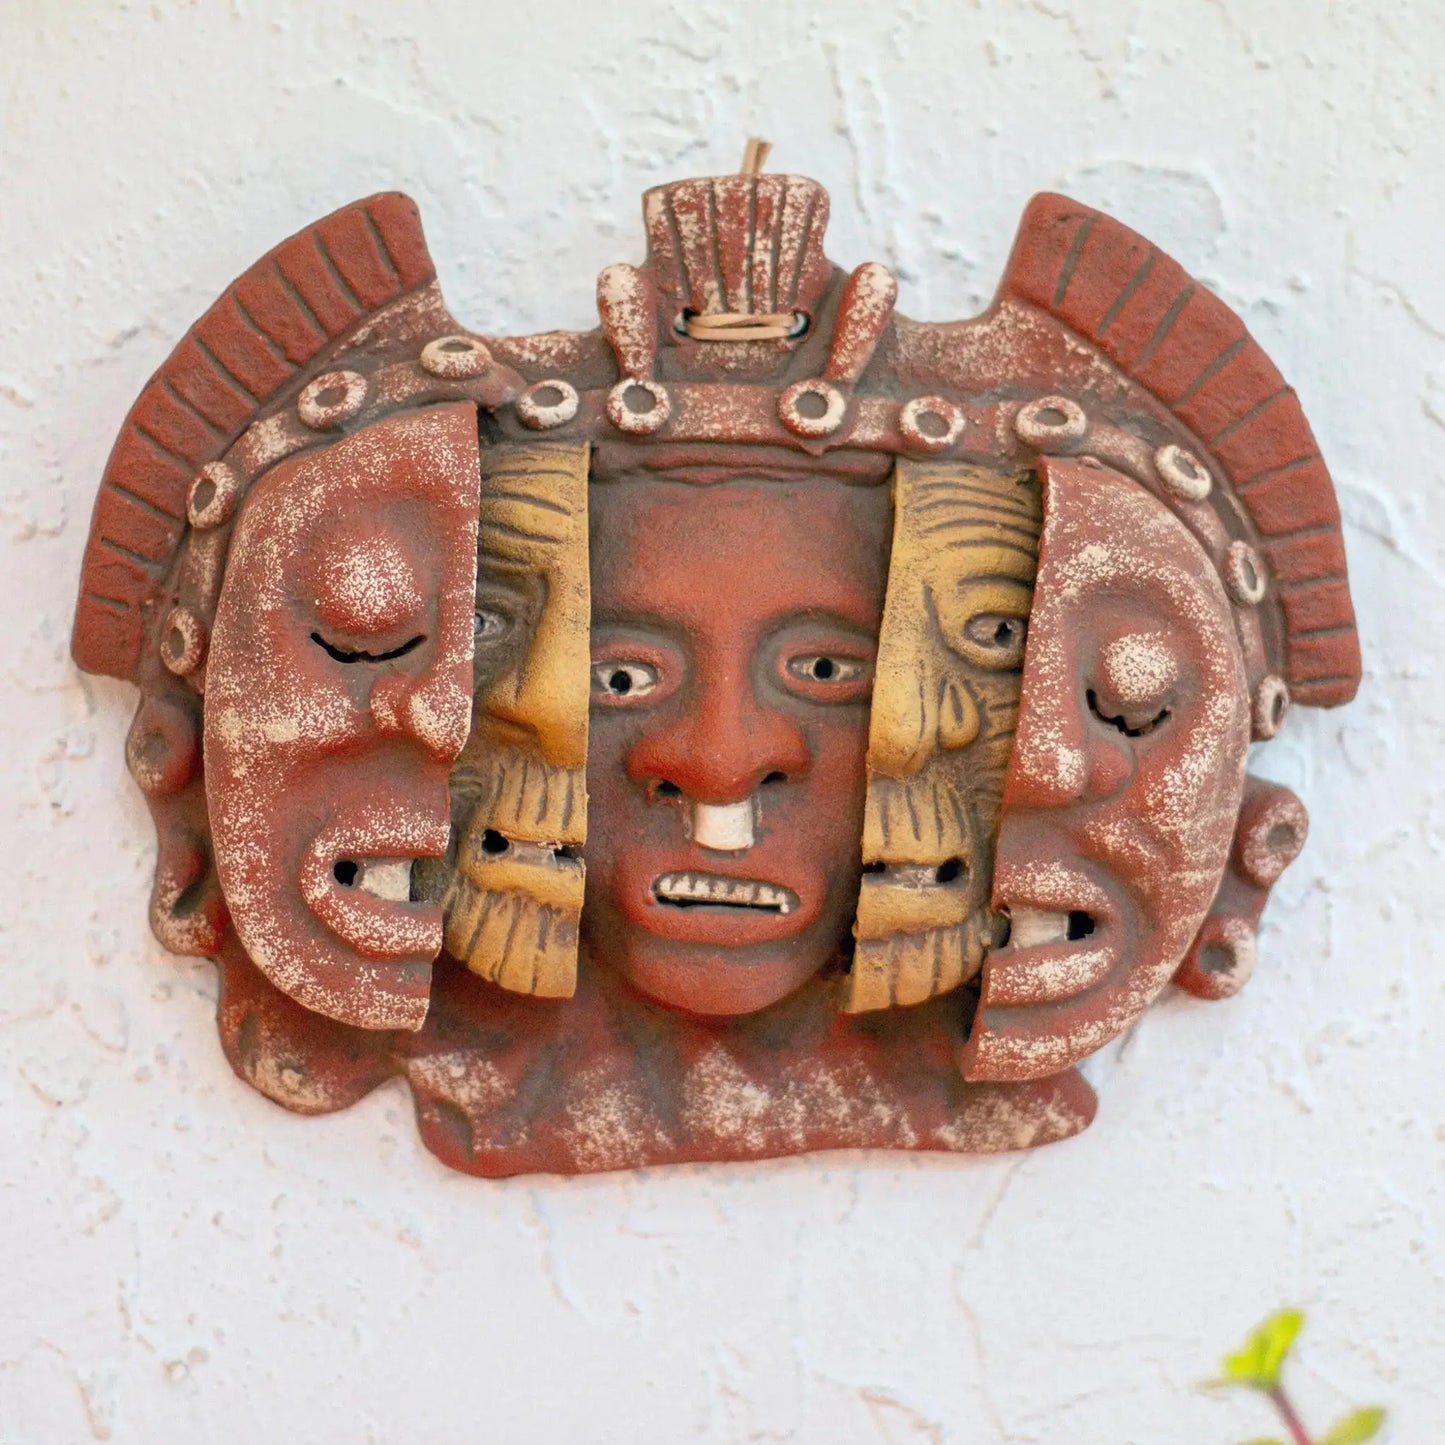 Three Ages of Man - Aztec Archaeological Ceramic Mask - Art